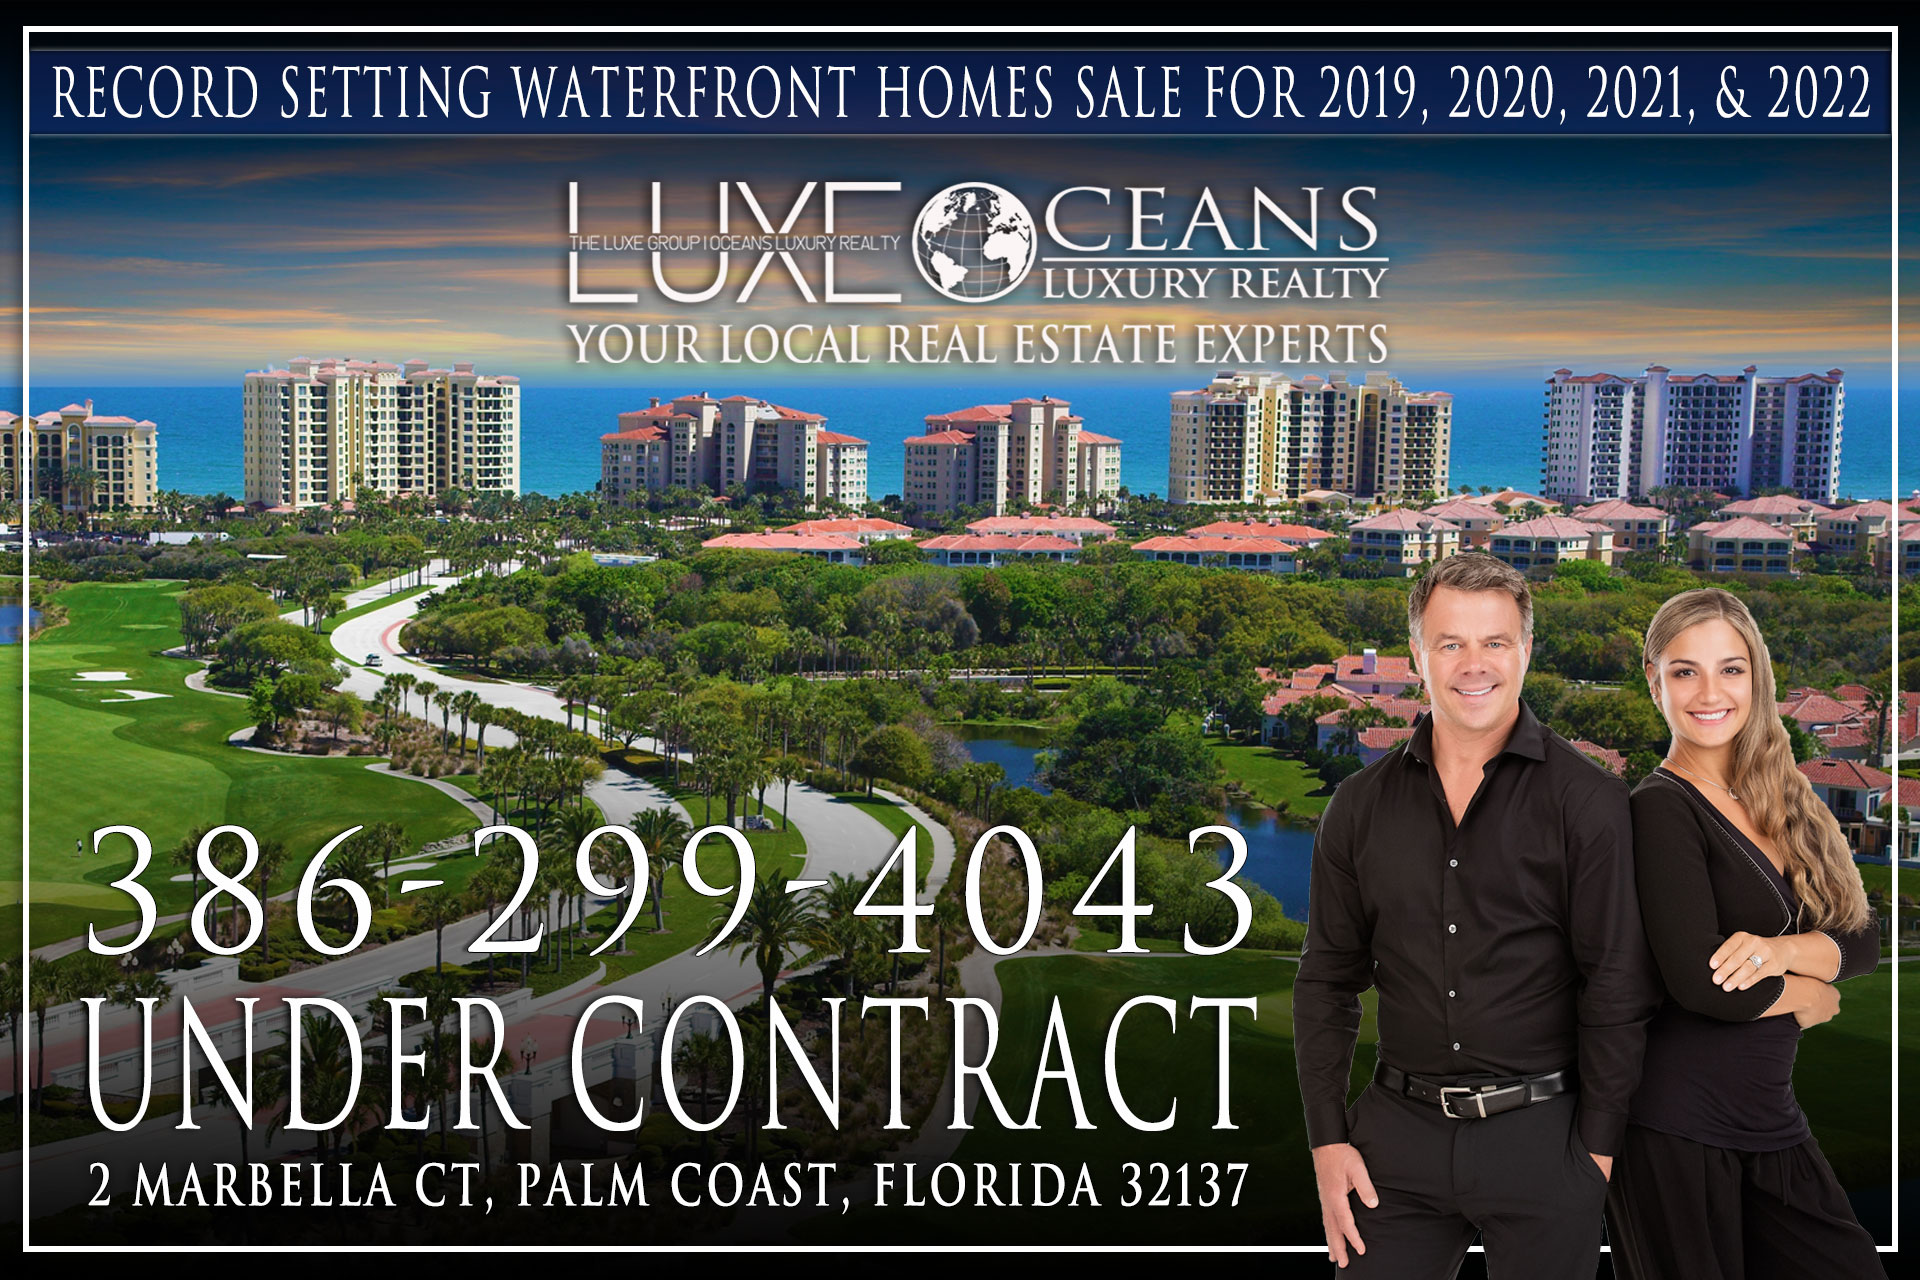 2 Marbella Court in Hammock Dunes, FL 32137. Gated golfing community luxury real estate. Hammock Dunes lakefront home under contract. The LUXE Group at Oceans Luxury Realty 386-299-4043